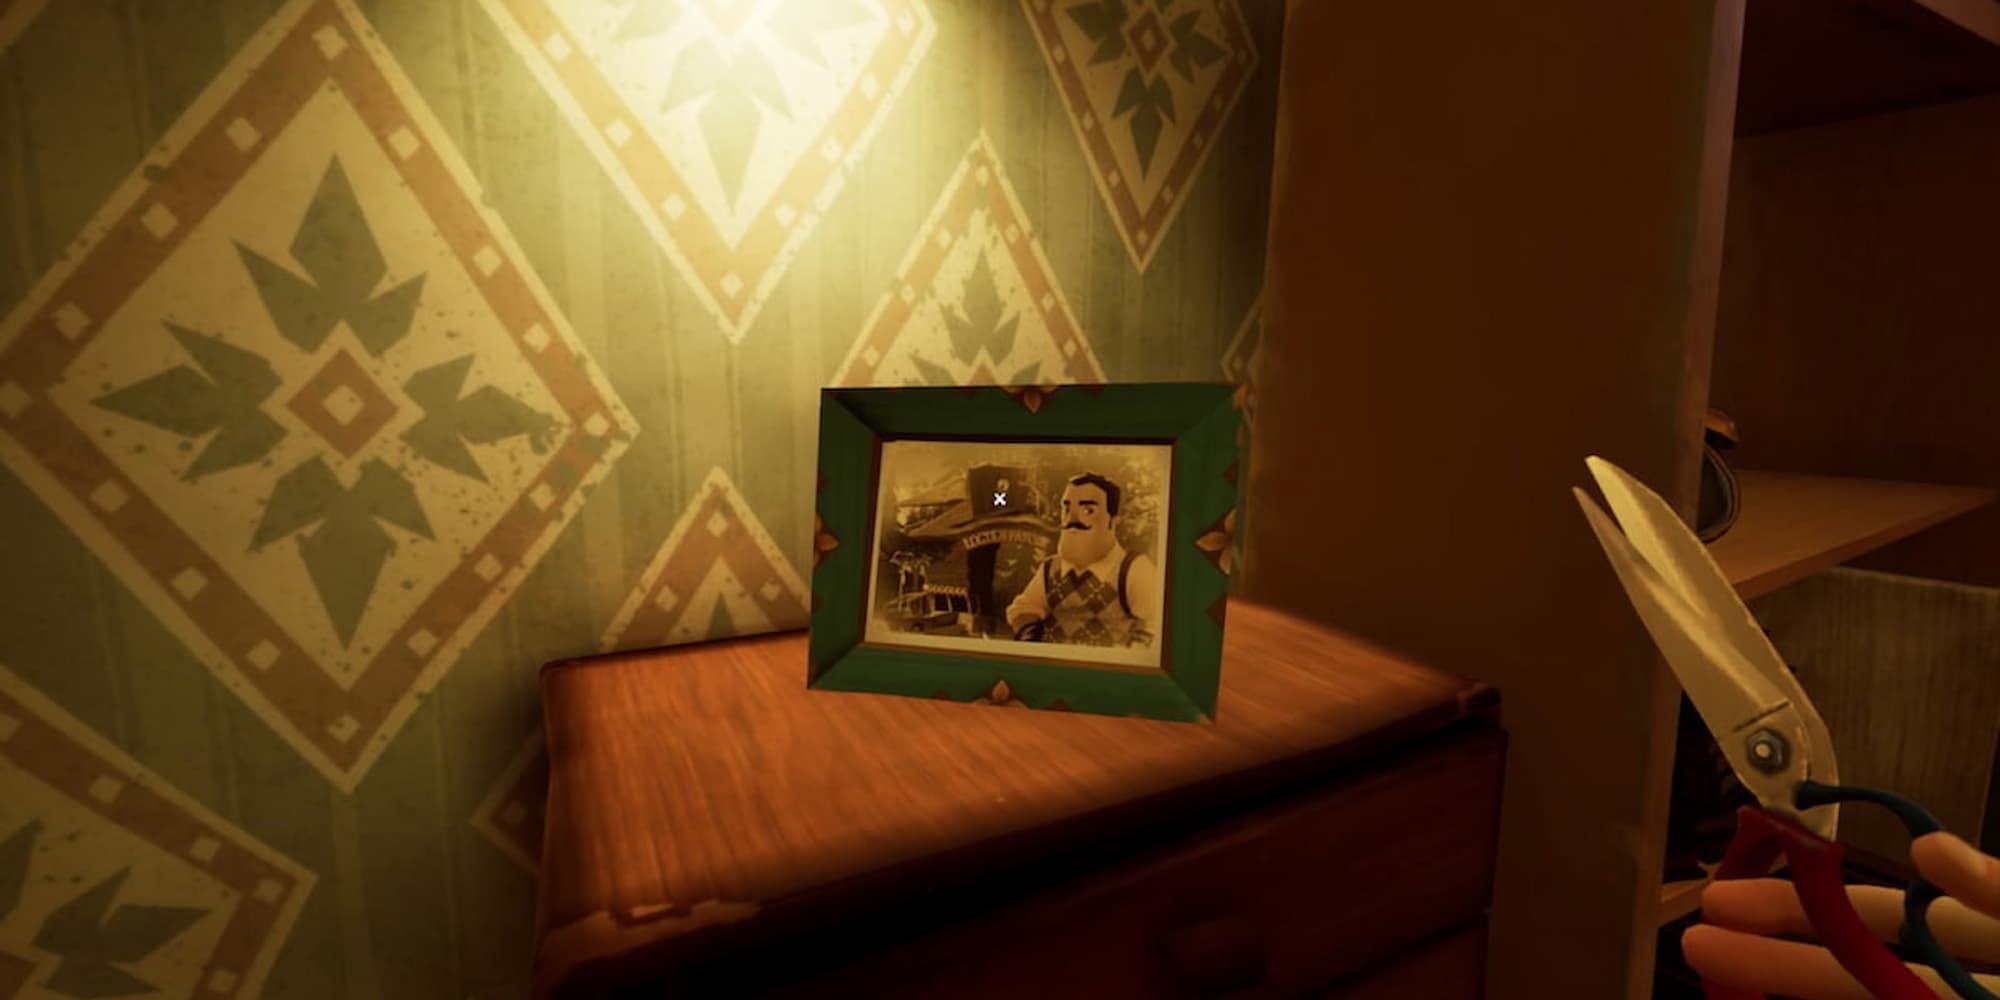 A player holding Scissors looks at a framed photo on a dresser in Hello Neighbor 2.